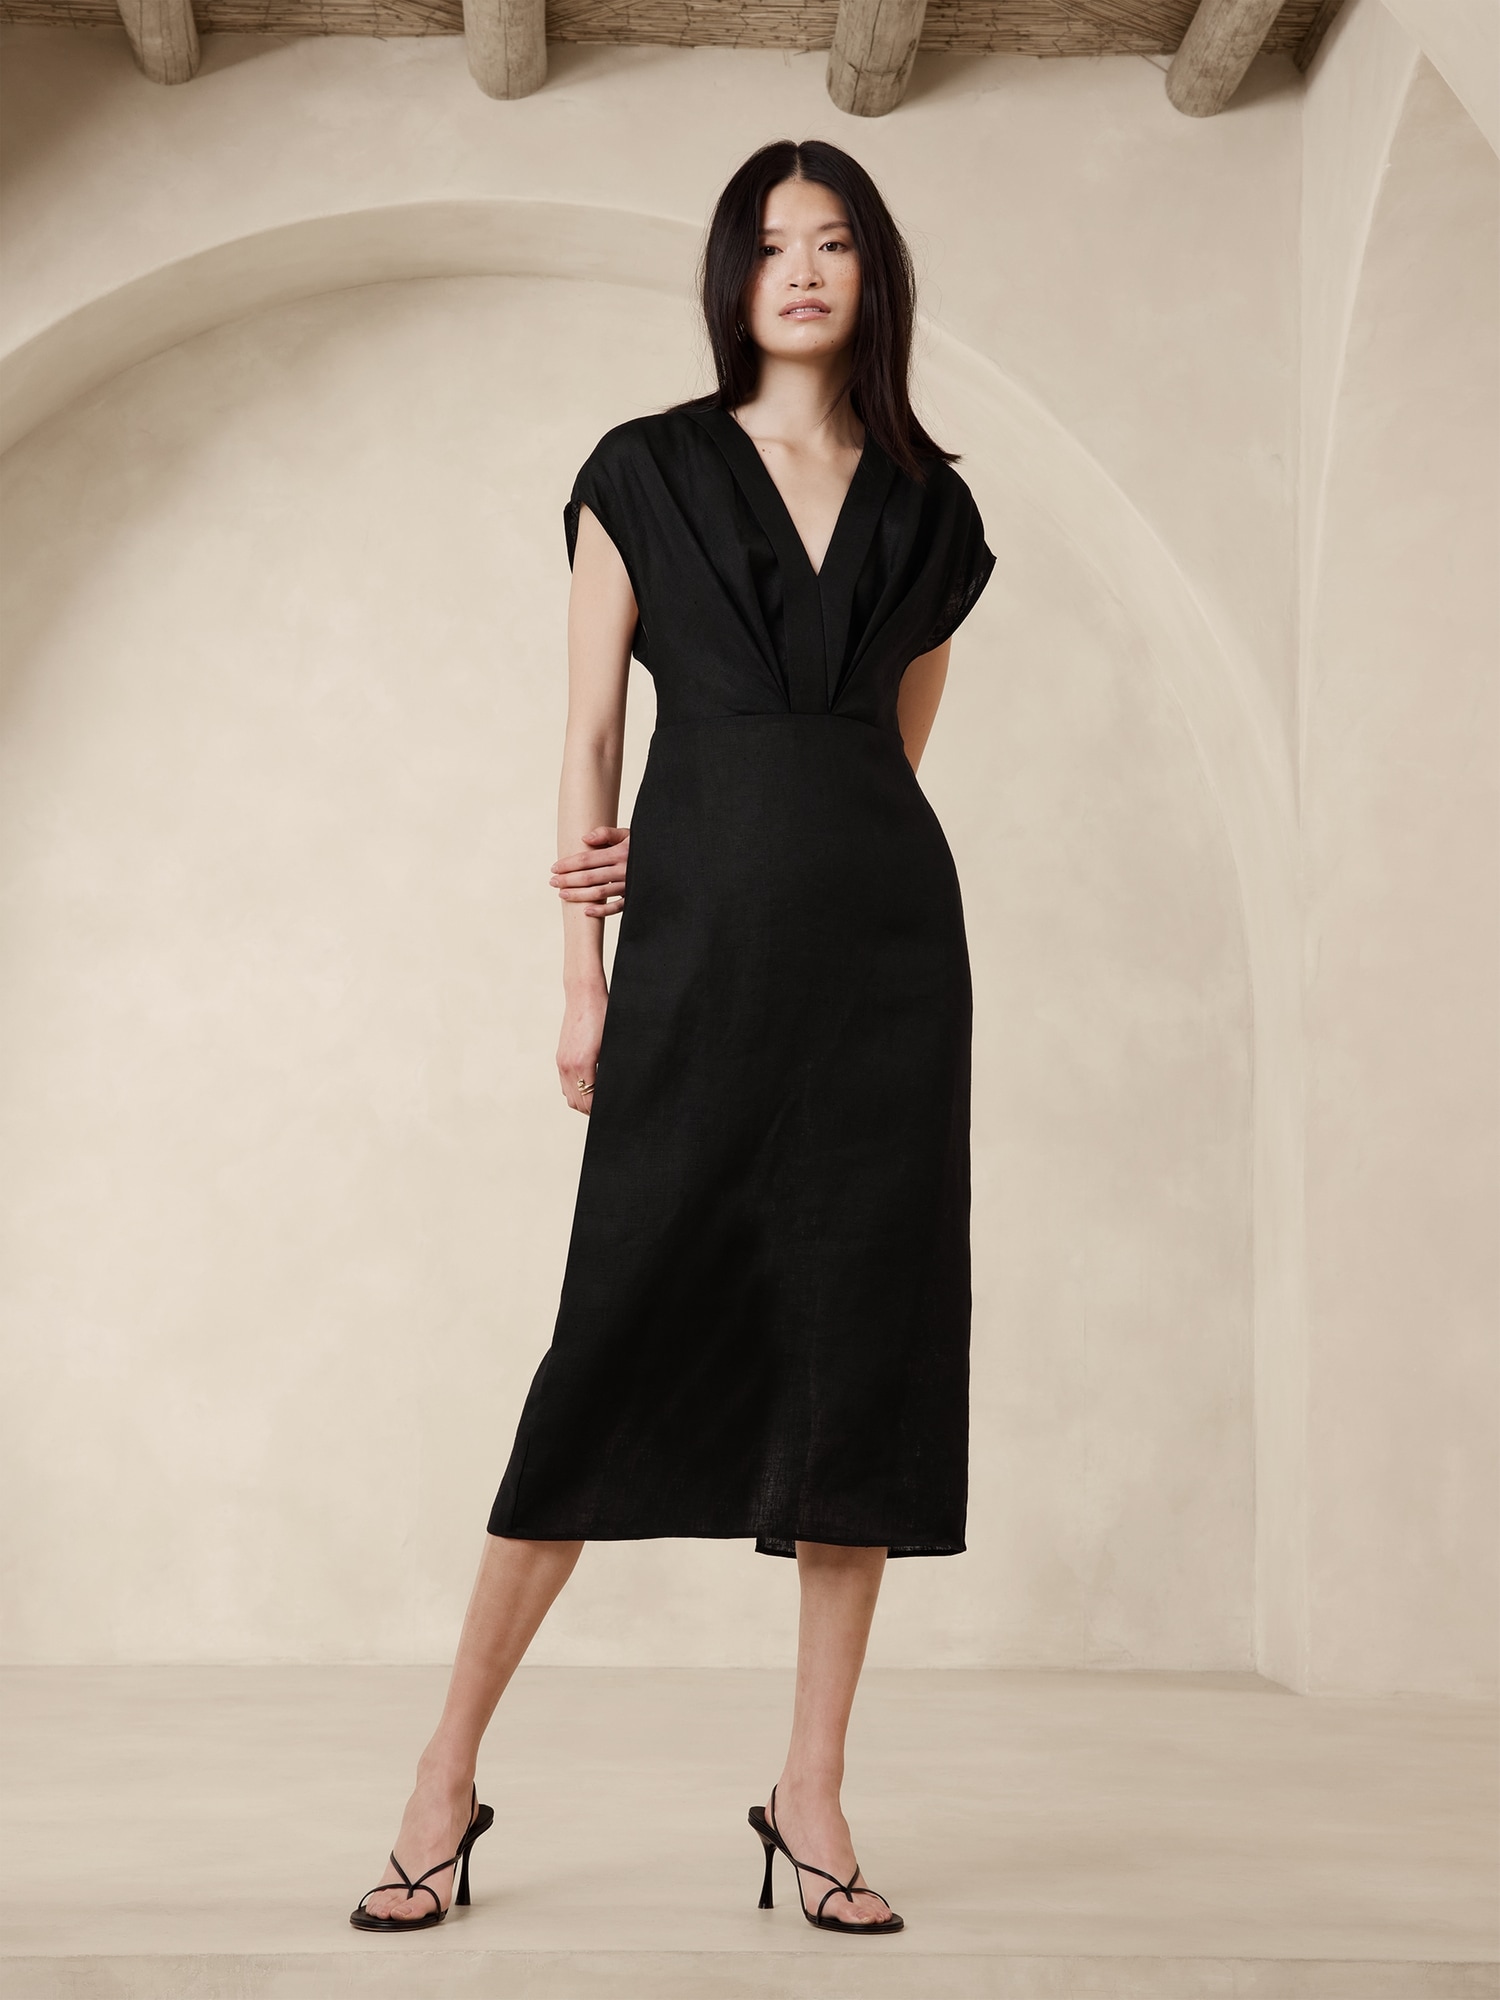 Elegant Halter Party Wear Maxi Dress For Women Perfect For Casual, Evening  Parties, And Streetwear From Benedetto, $16.94